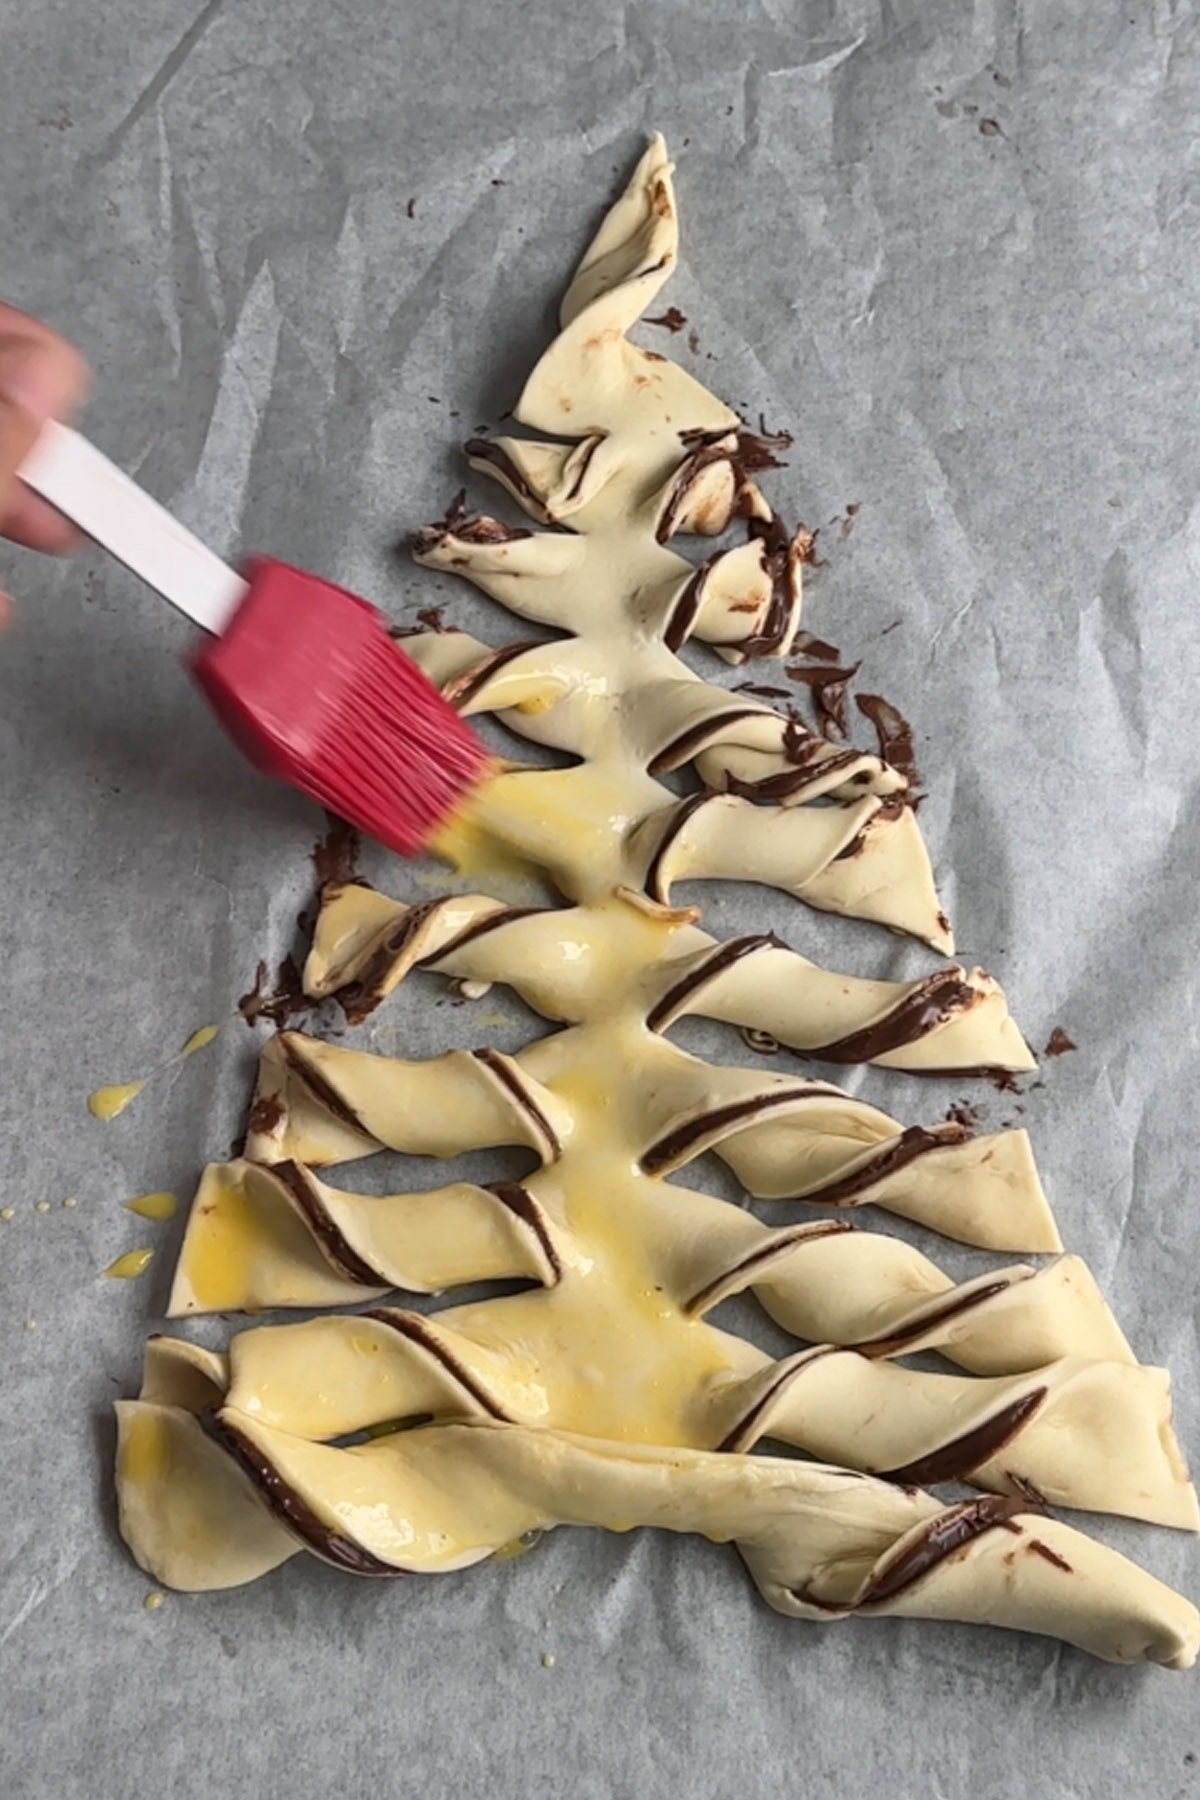 Egg is brushed onto a Nutella puff pastry tree before baking.